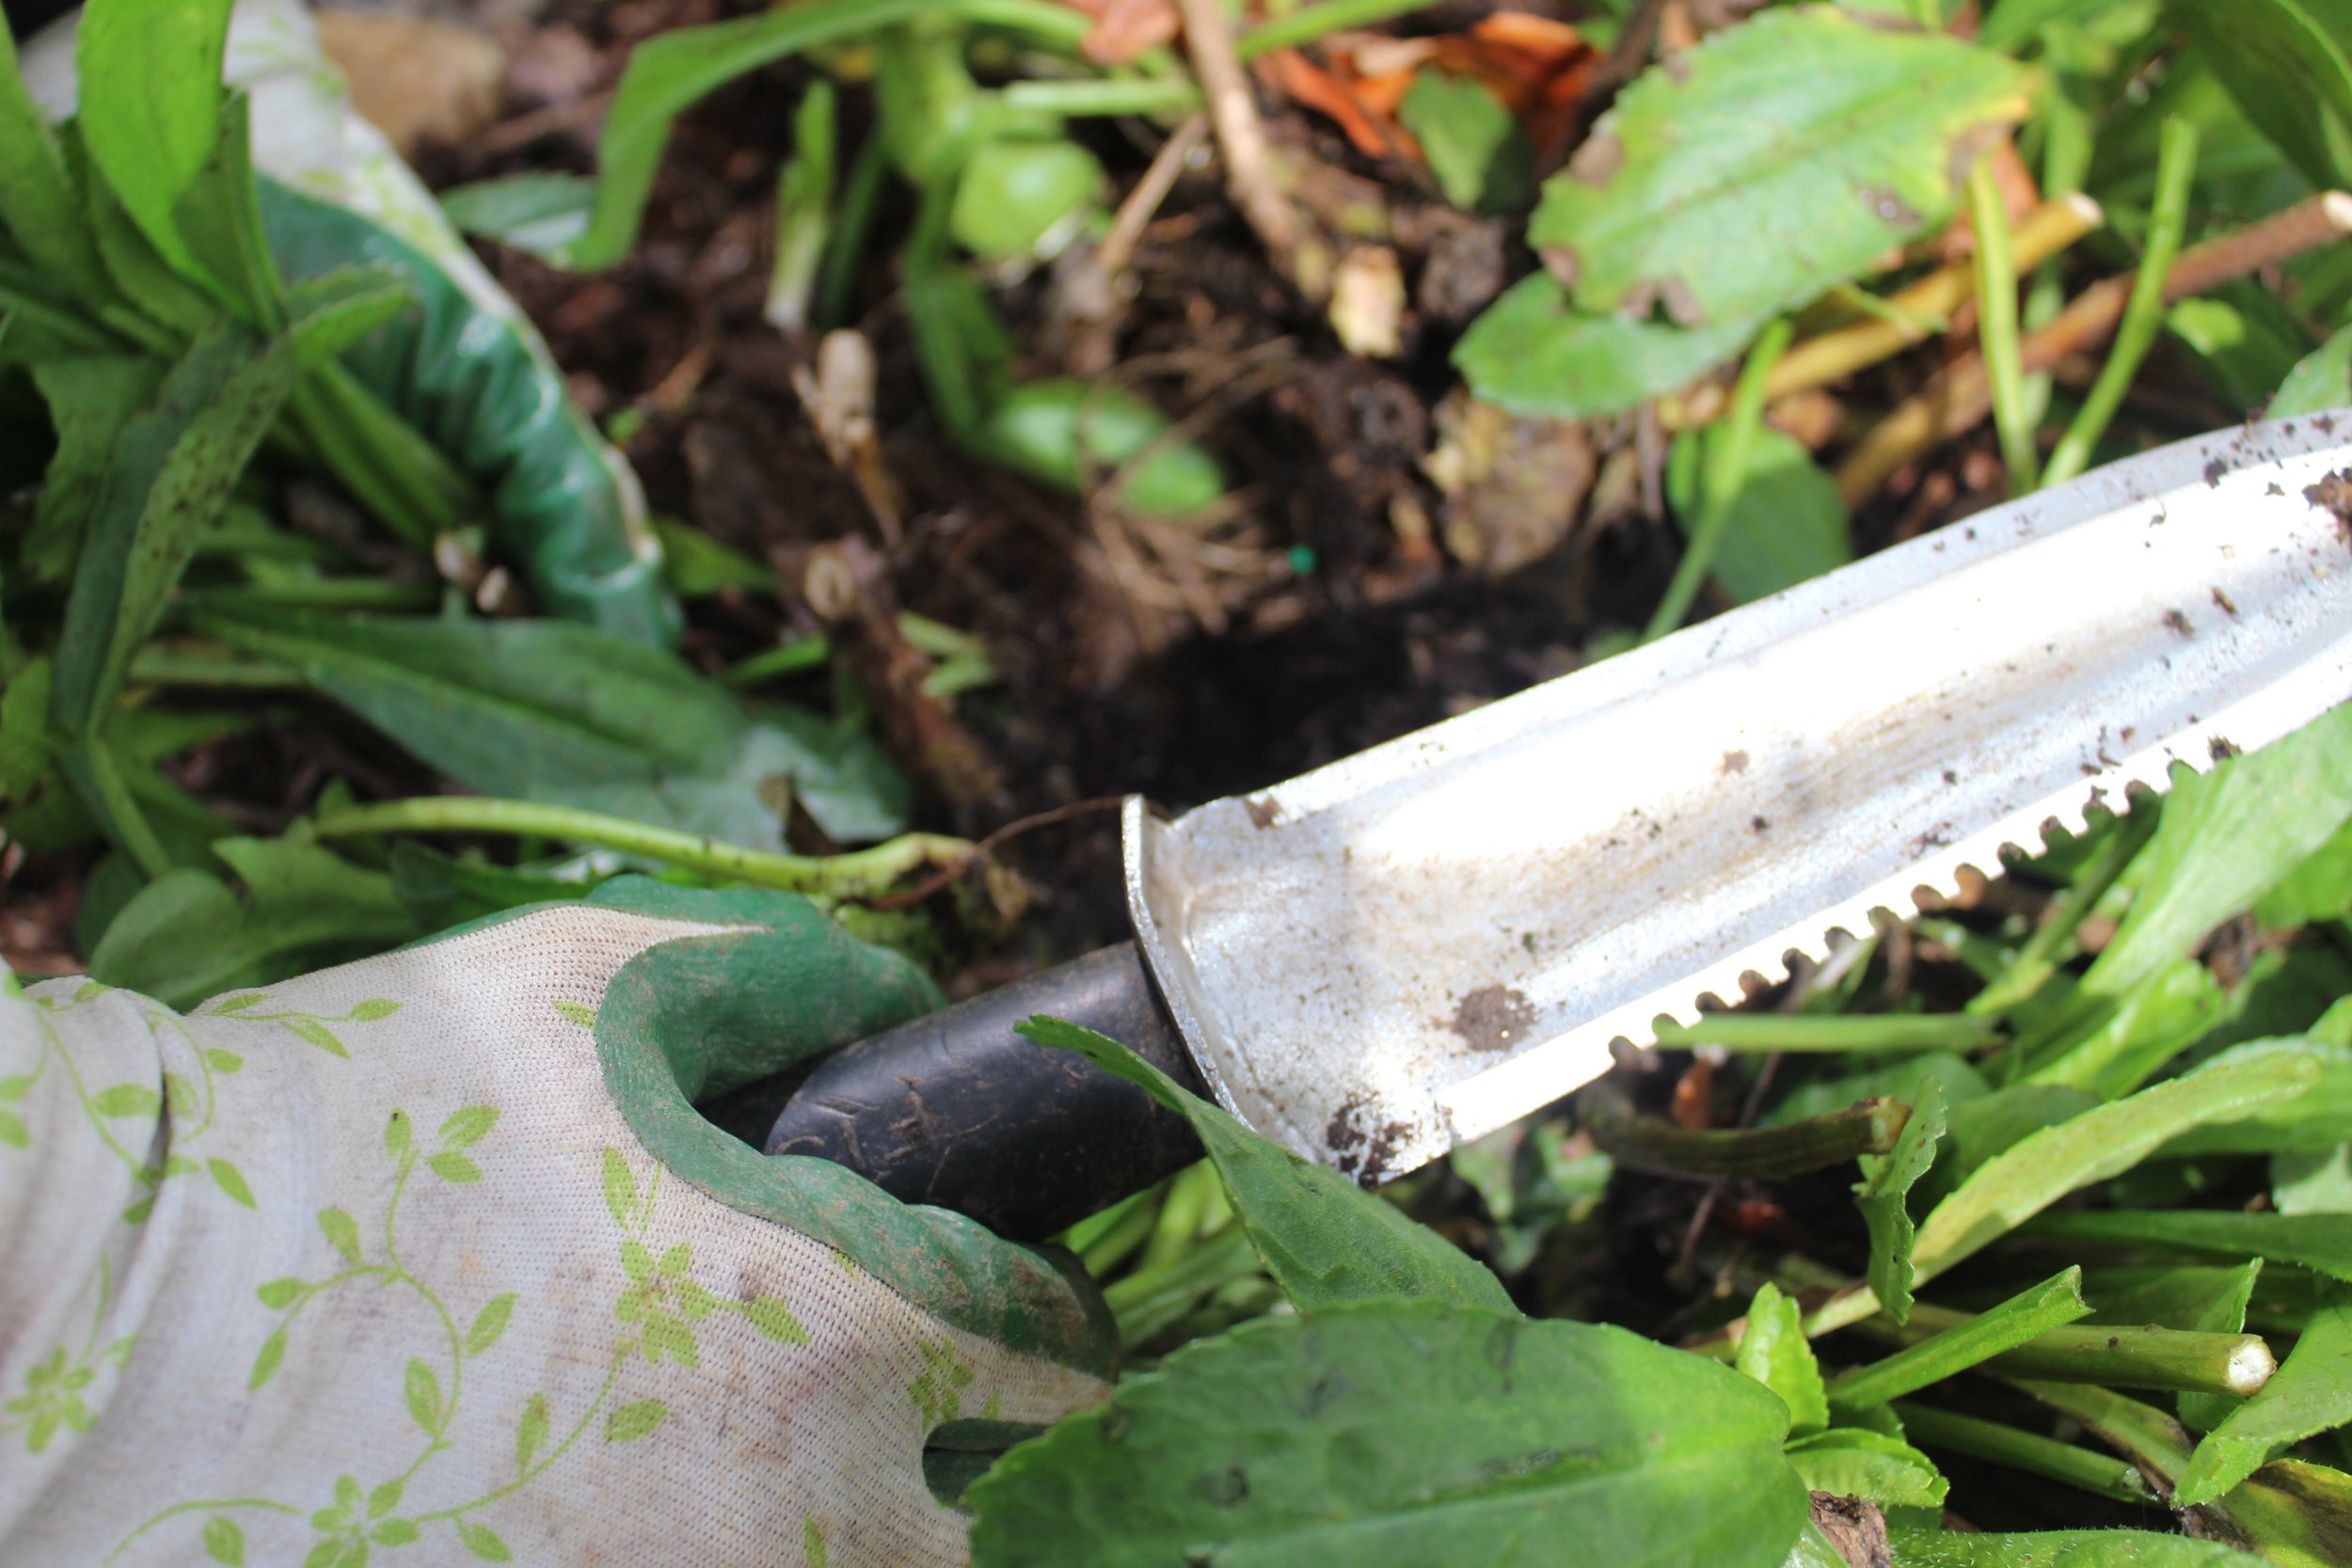 Use shovel or knife for dividing. - A Hori-Hori knife is a perfect garden tool for dividing perennials. (Here's that link again. Staff's favorite garden tools.)